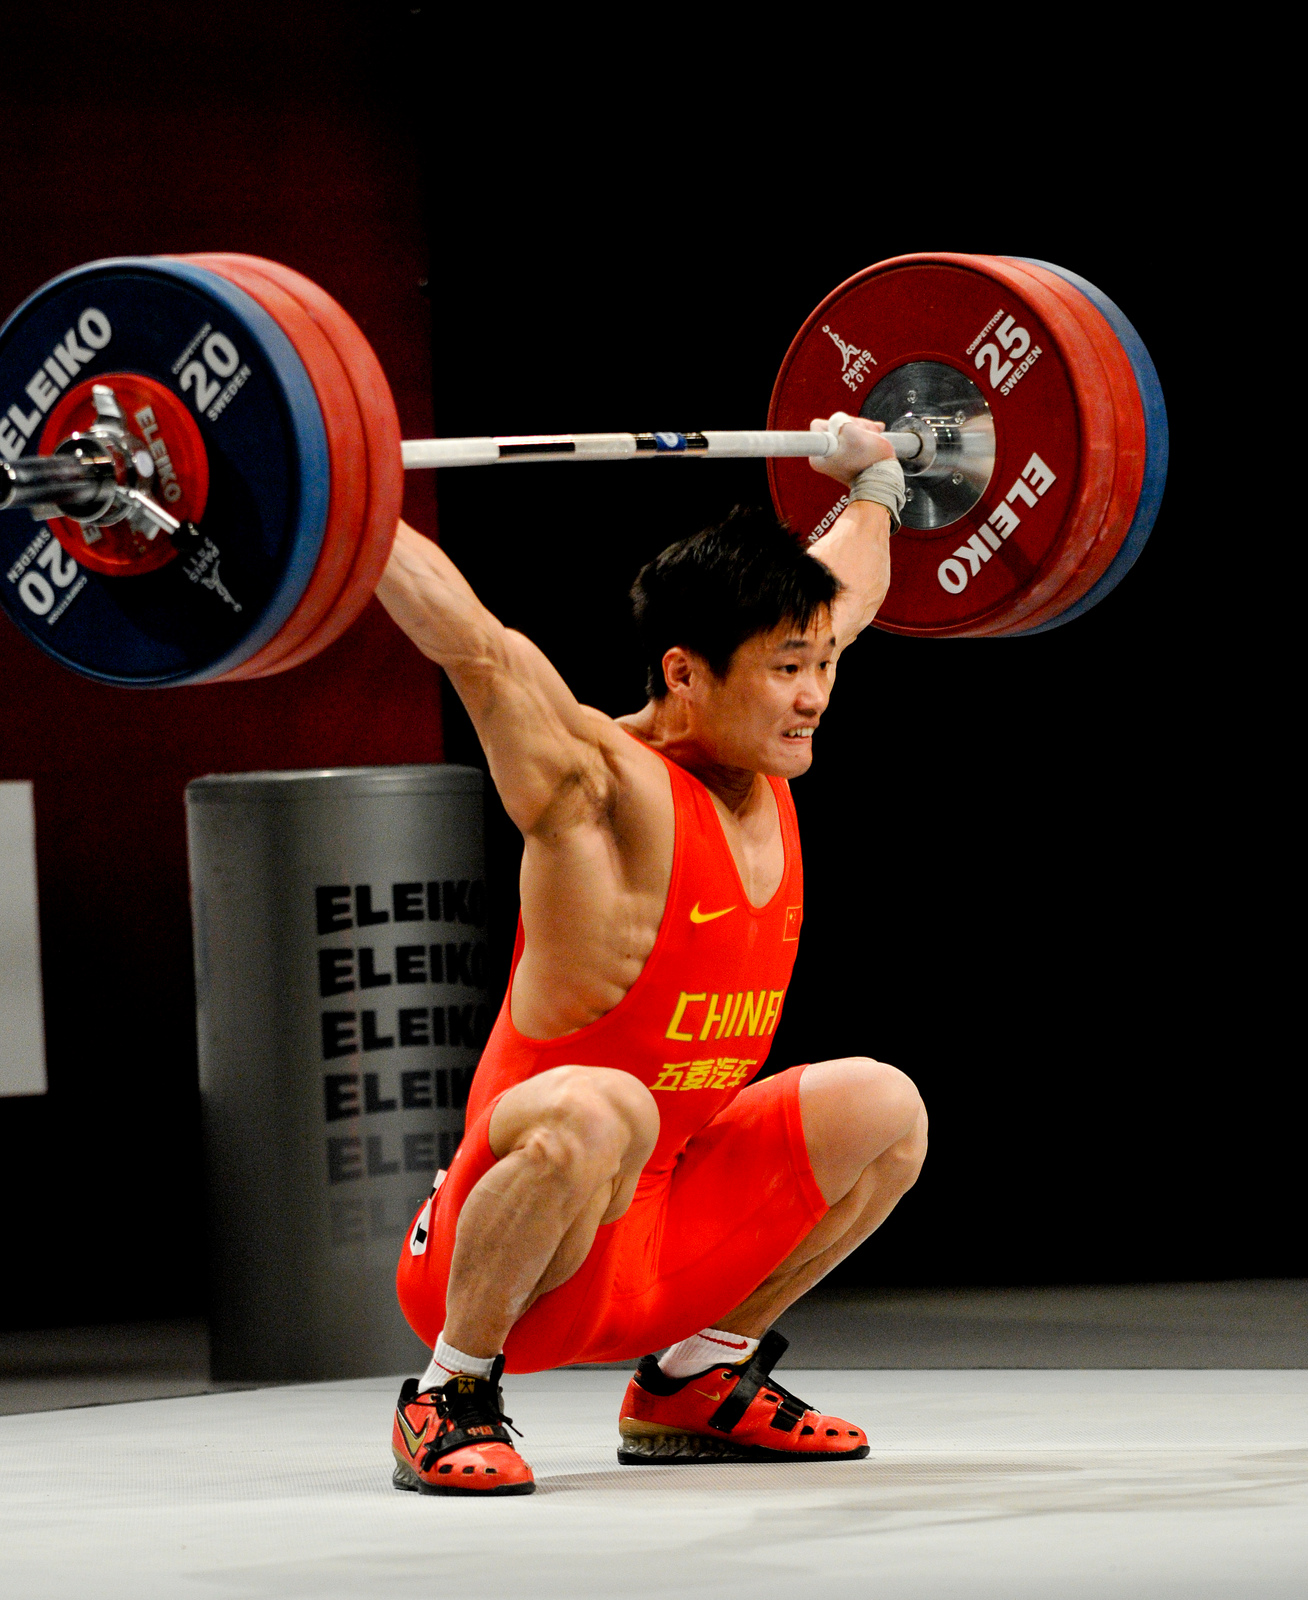 Breaking Down Weightlifting Movements: The Snatch